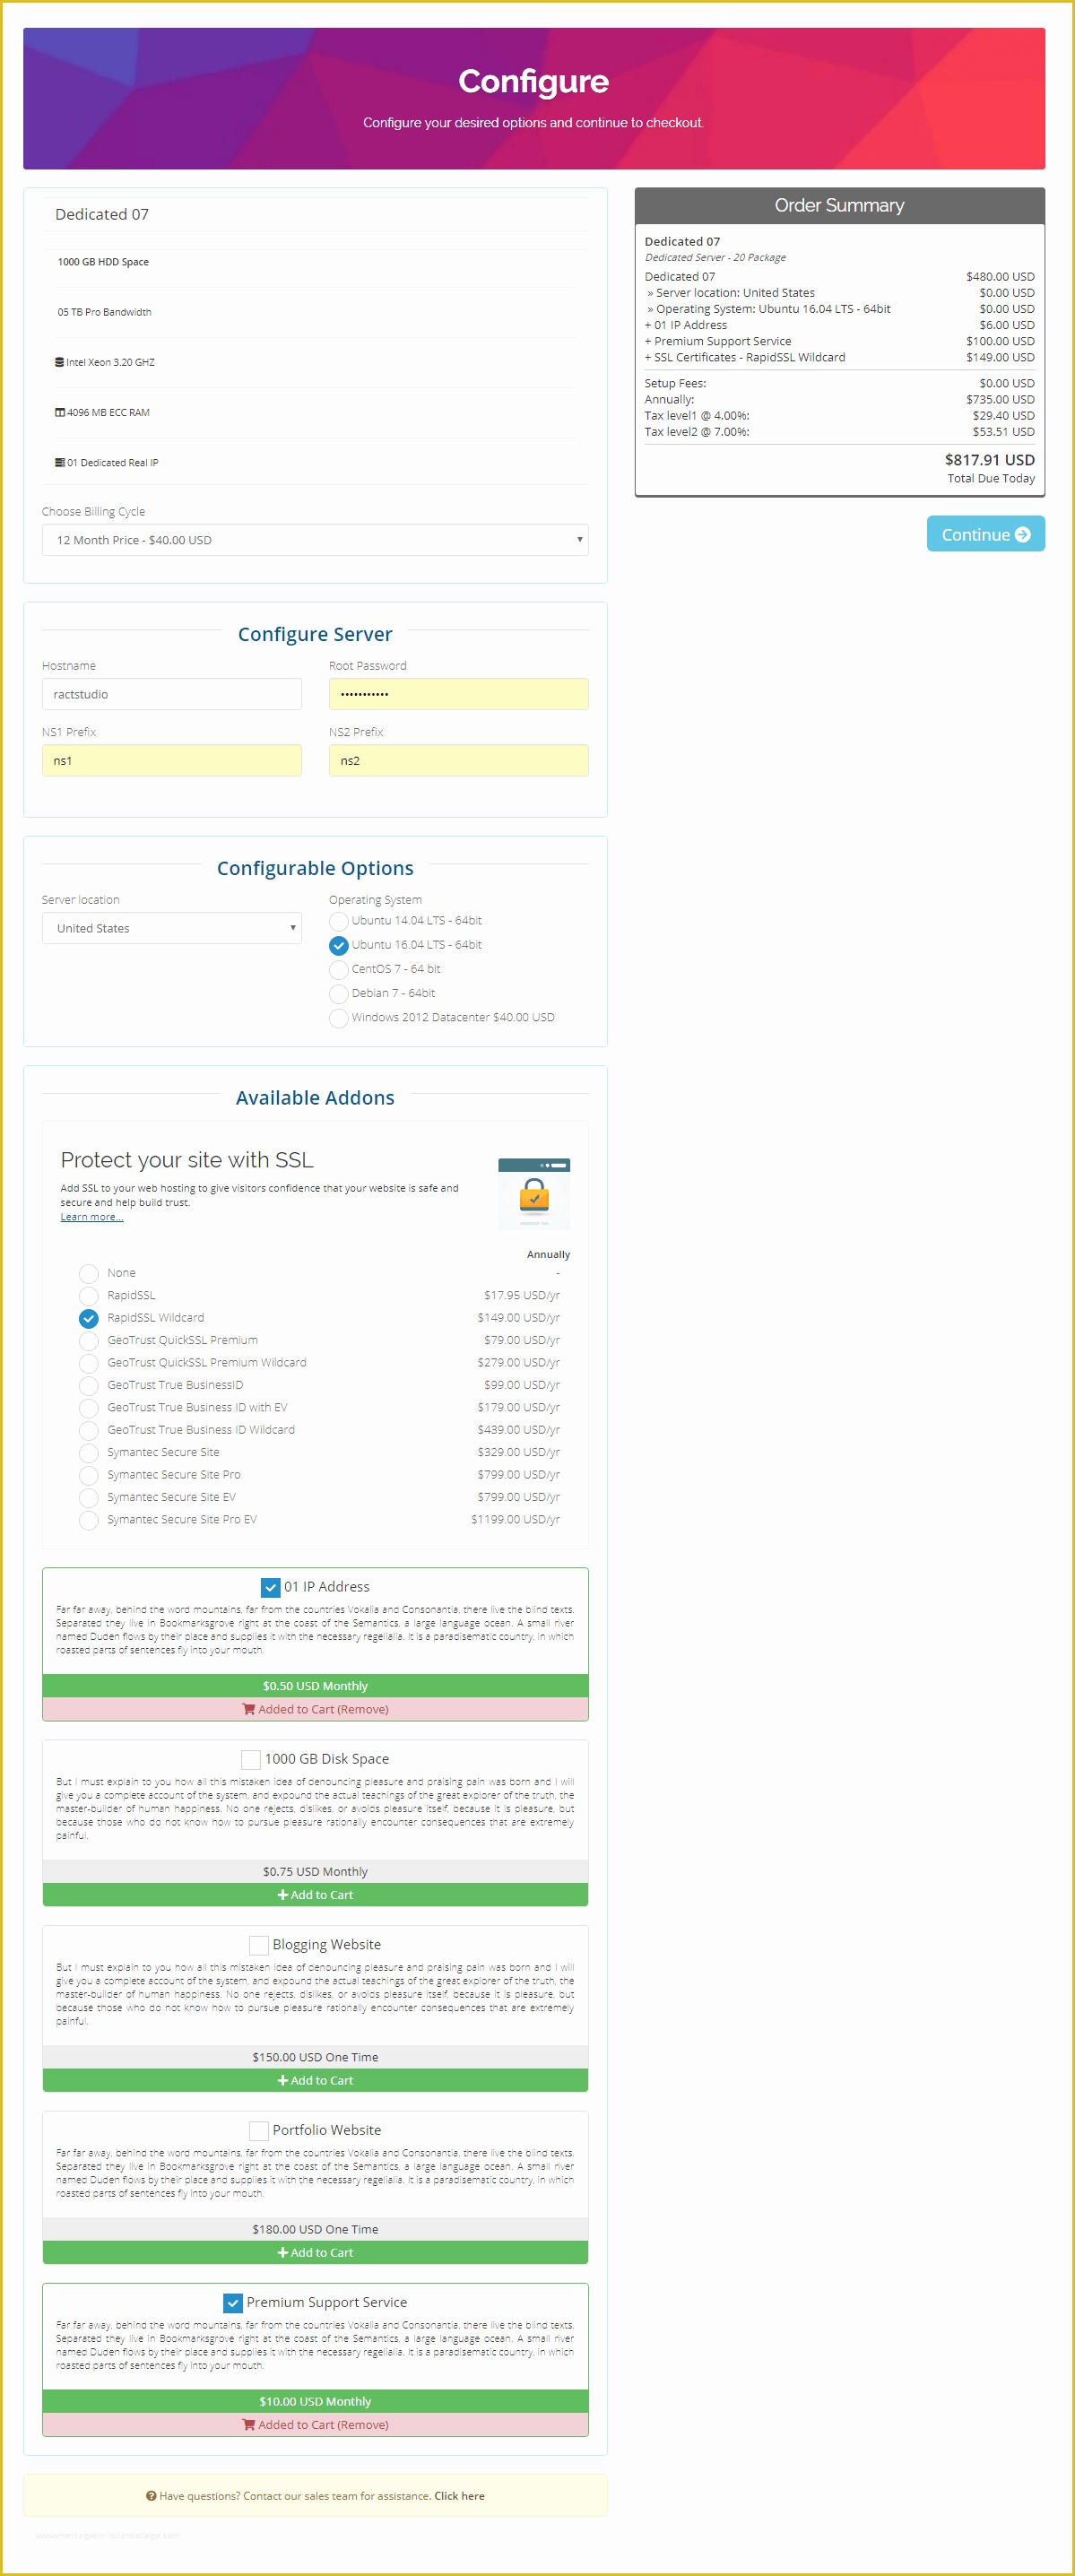 Whmcs order form Templates Free Of Flip Hosting Cart Whmcs order form Template E Page